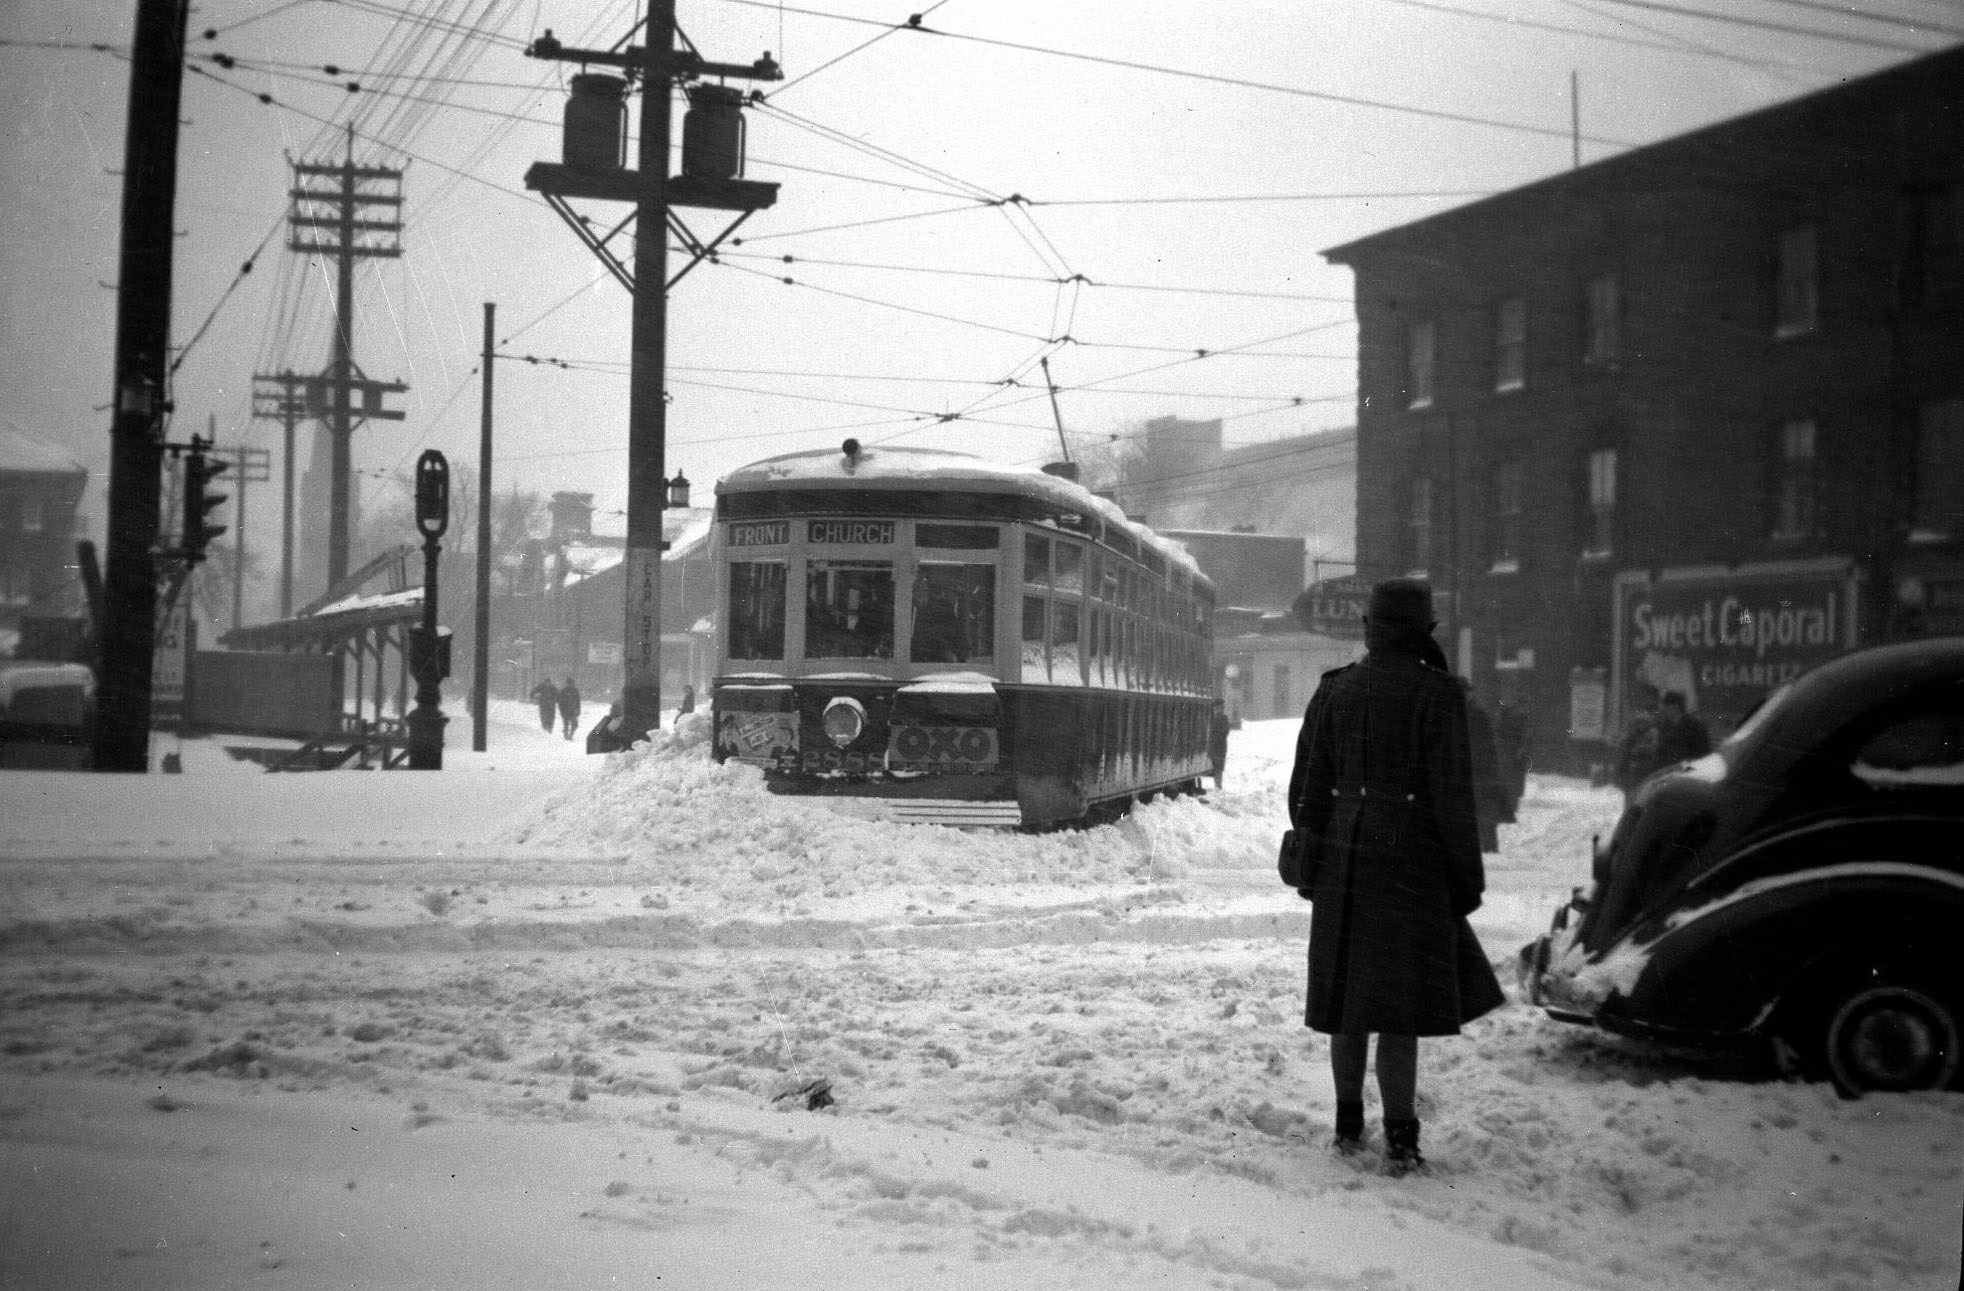 Streetcar 2888 at Church and Carlton on the 12th of December 1944.